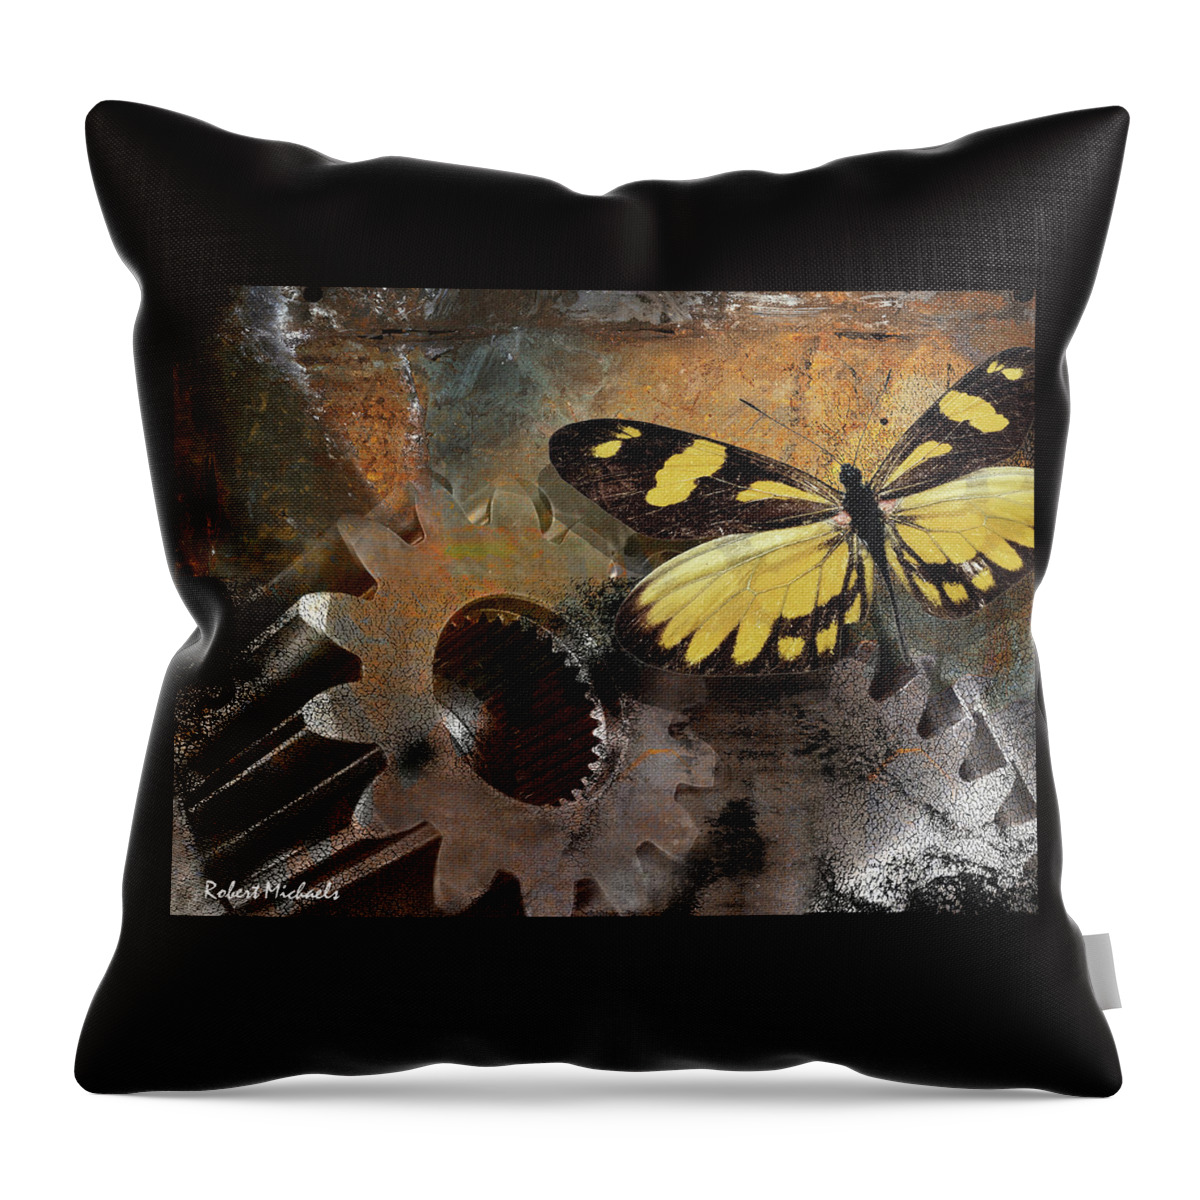 Butterly Throw Pillow featuring the photograph Mariposa by Robert Michaels